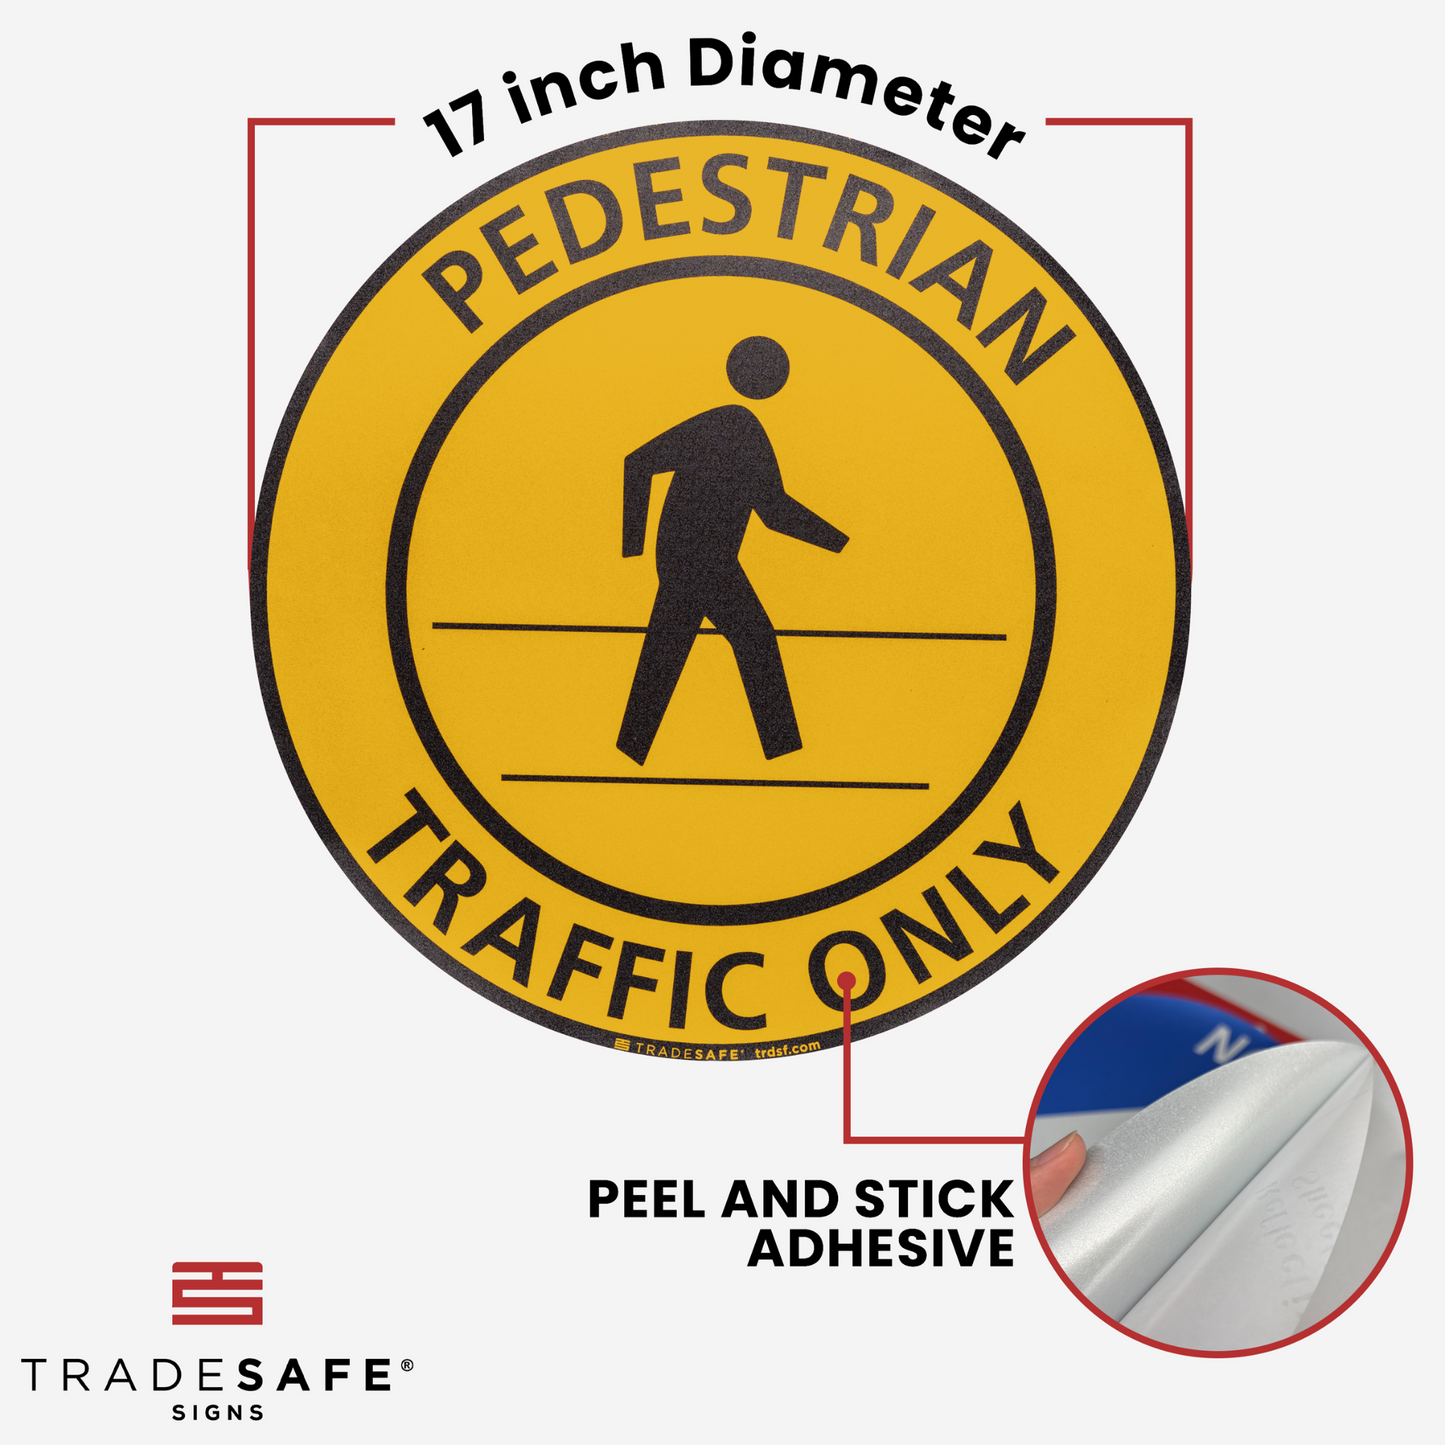 dimensions of pedestrian traffic only sign